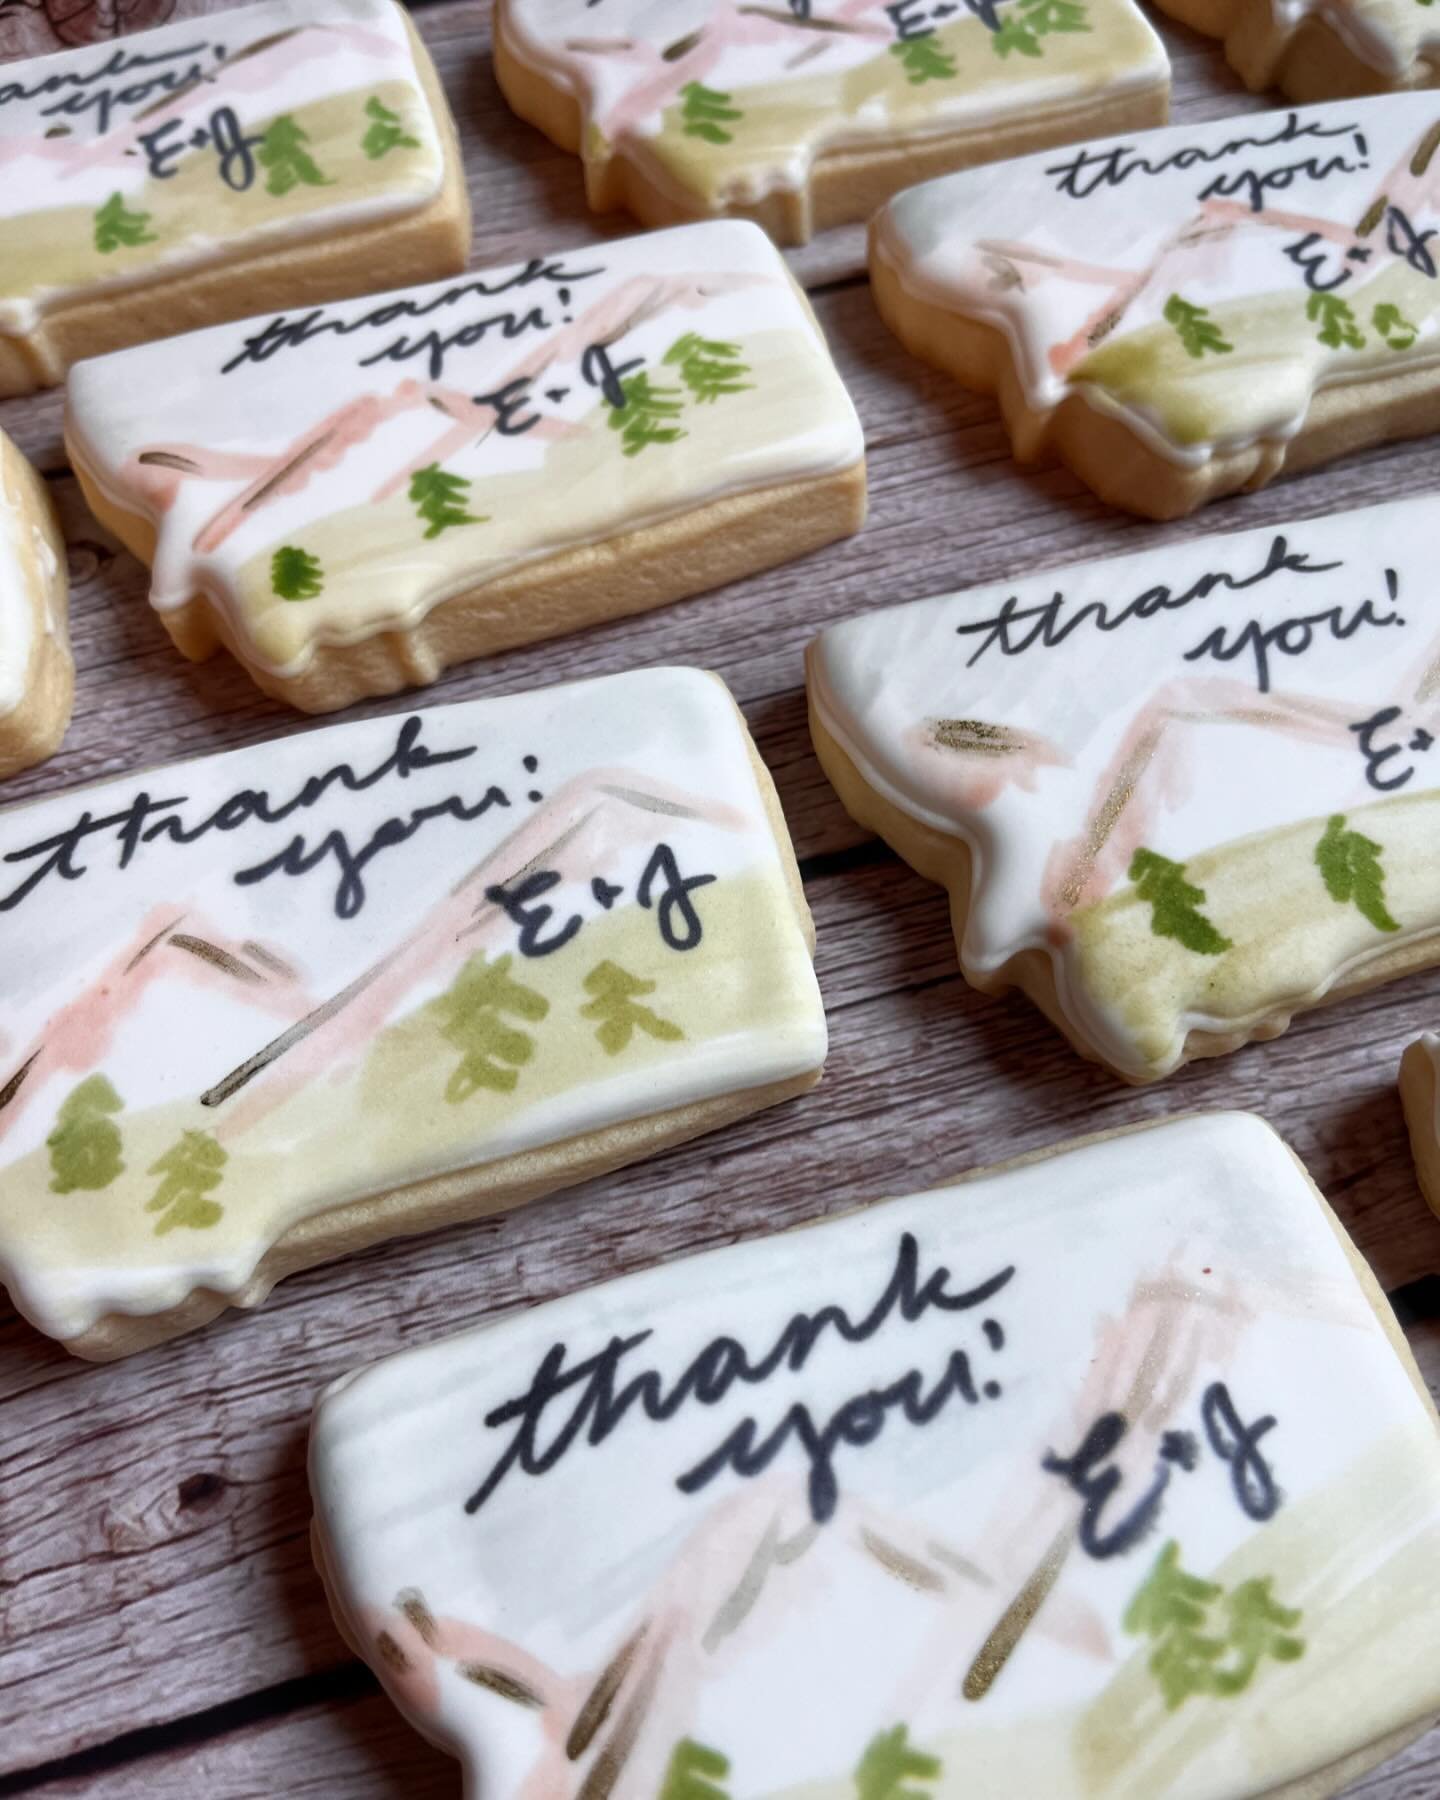 You can ensure your guests will put these favors to use! Personalized AND tasty. 🤤
.
.
.
#weddingfavors #cookiefavors #weddingcookies #royalicingsugarcookies #handpaintedcookies